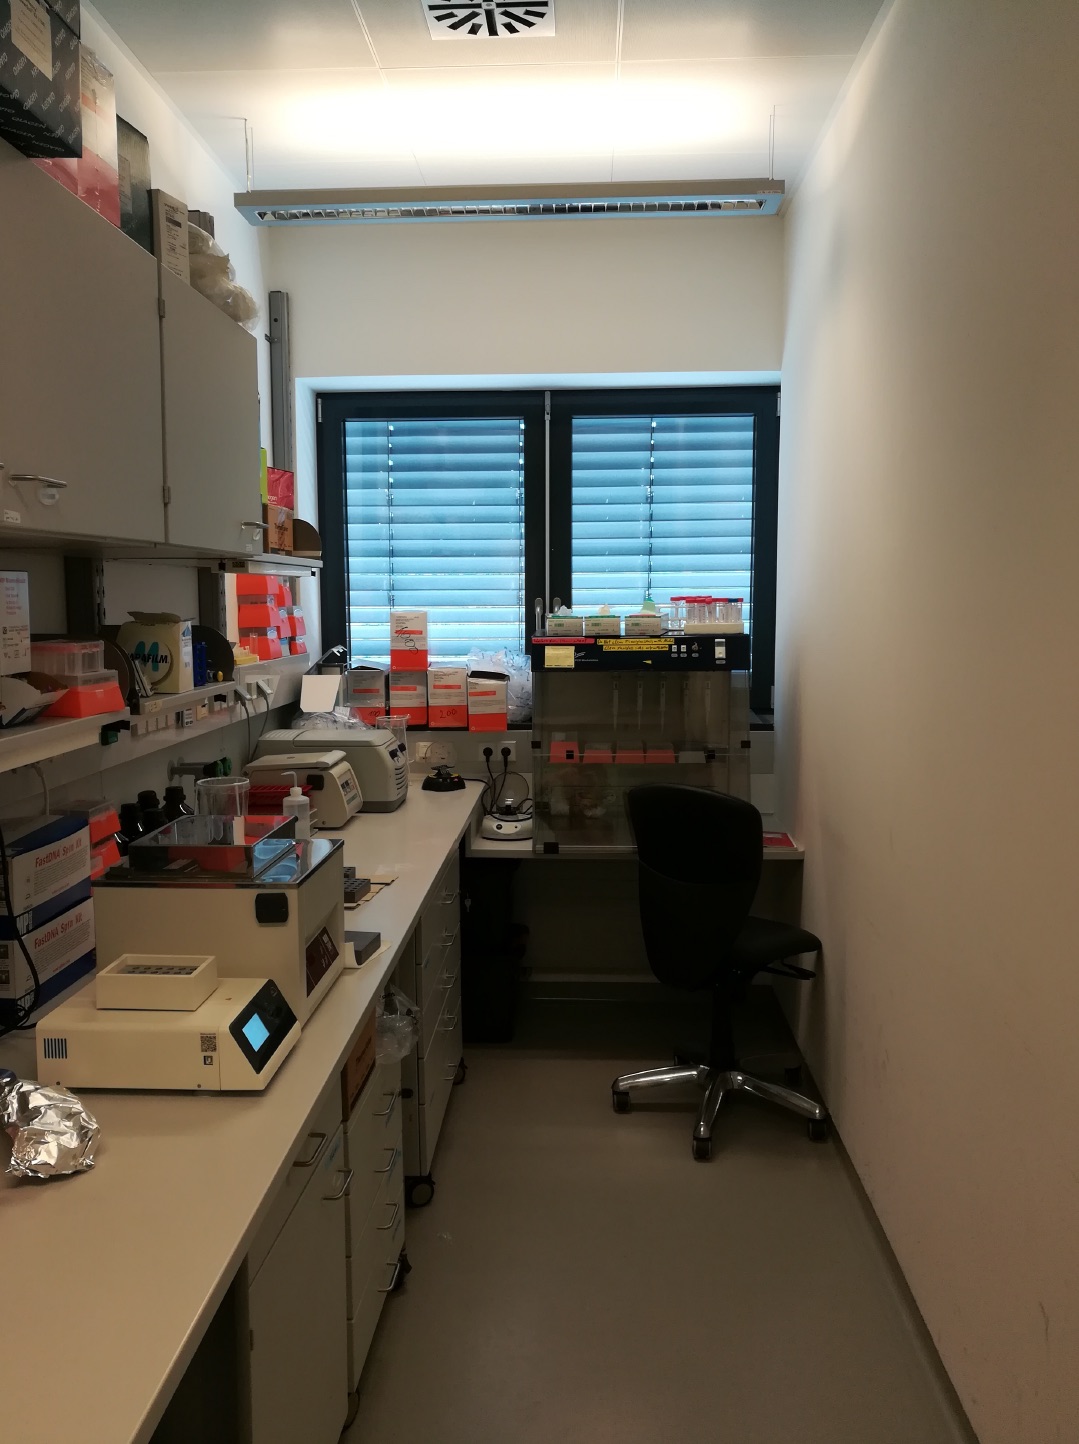 TA 2.19: DNA extraction laboratory at the Center for Microbial Life Detection at the Medical University Graz.